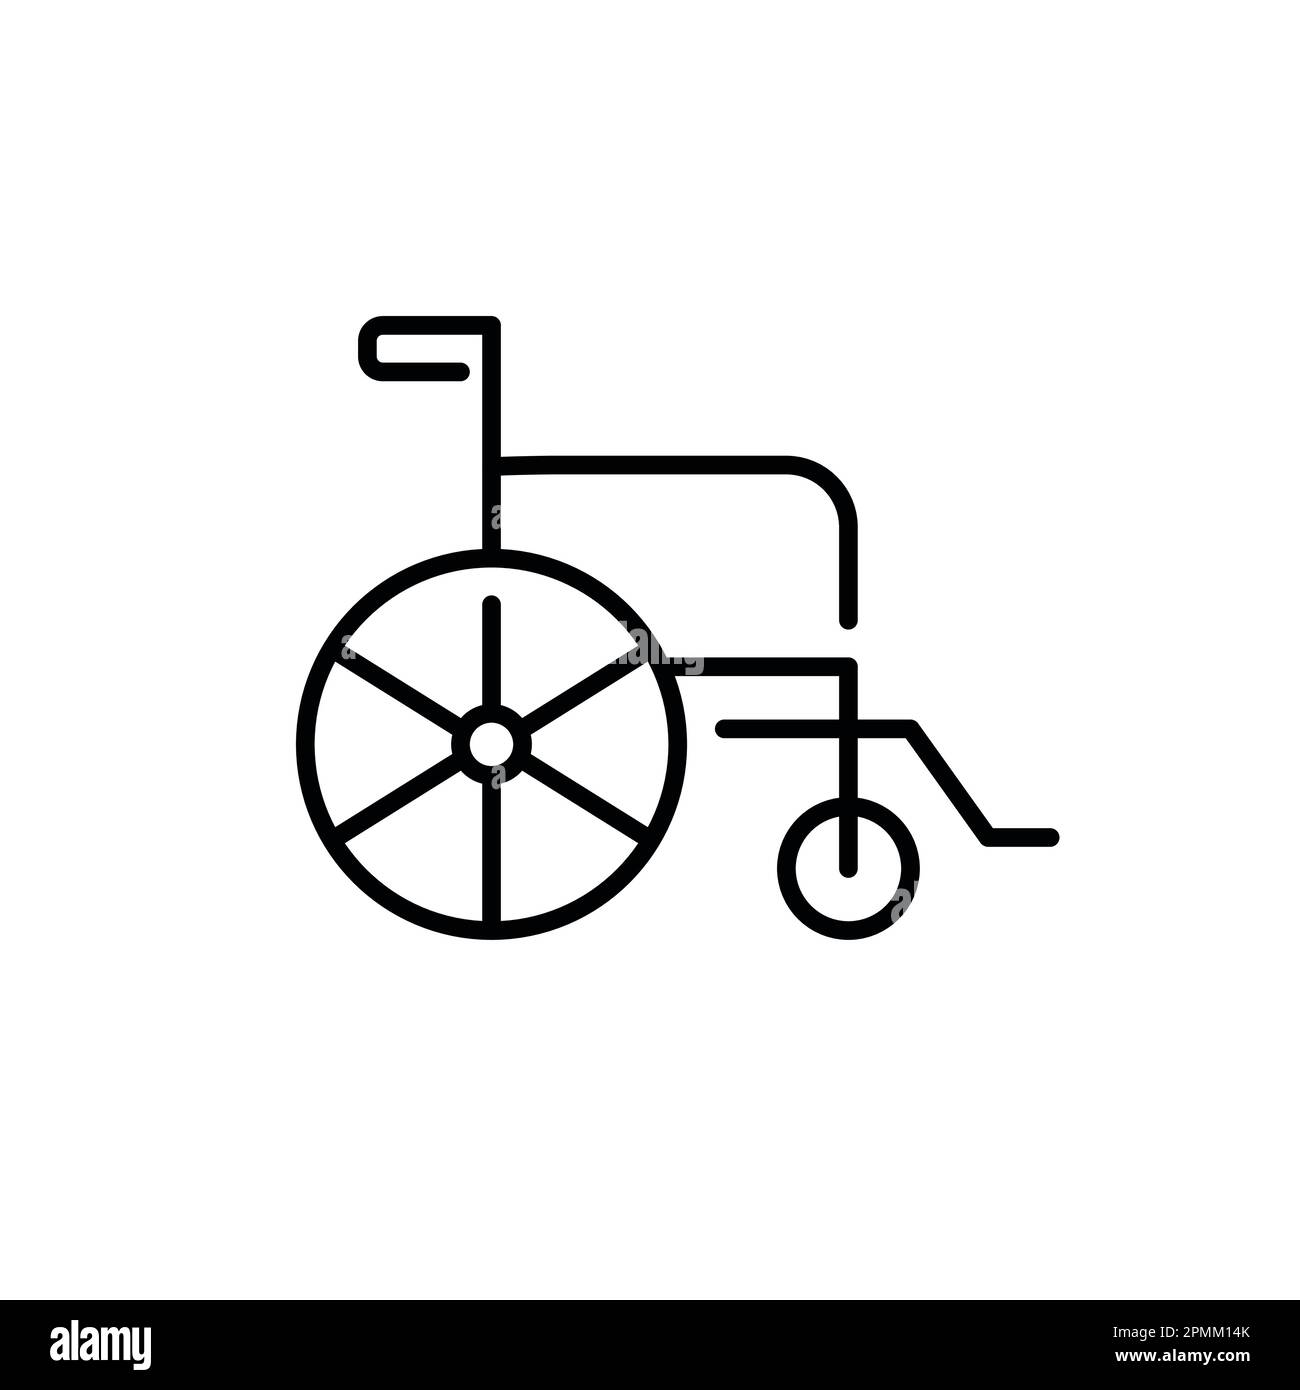 Mobility disabilities Cut Out Stock Images & Pictures - Alamy